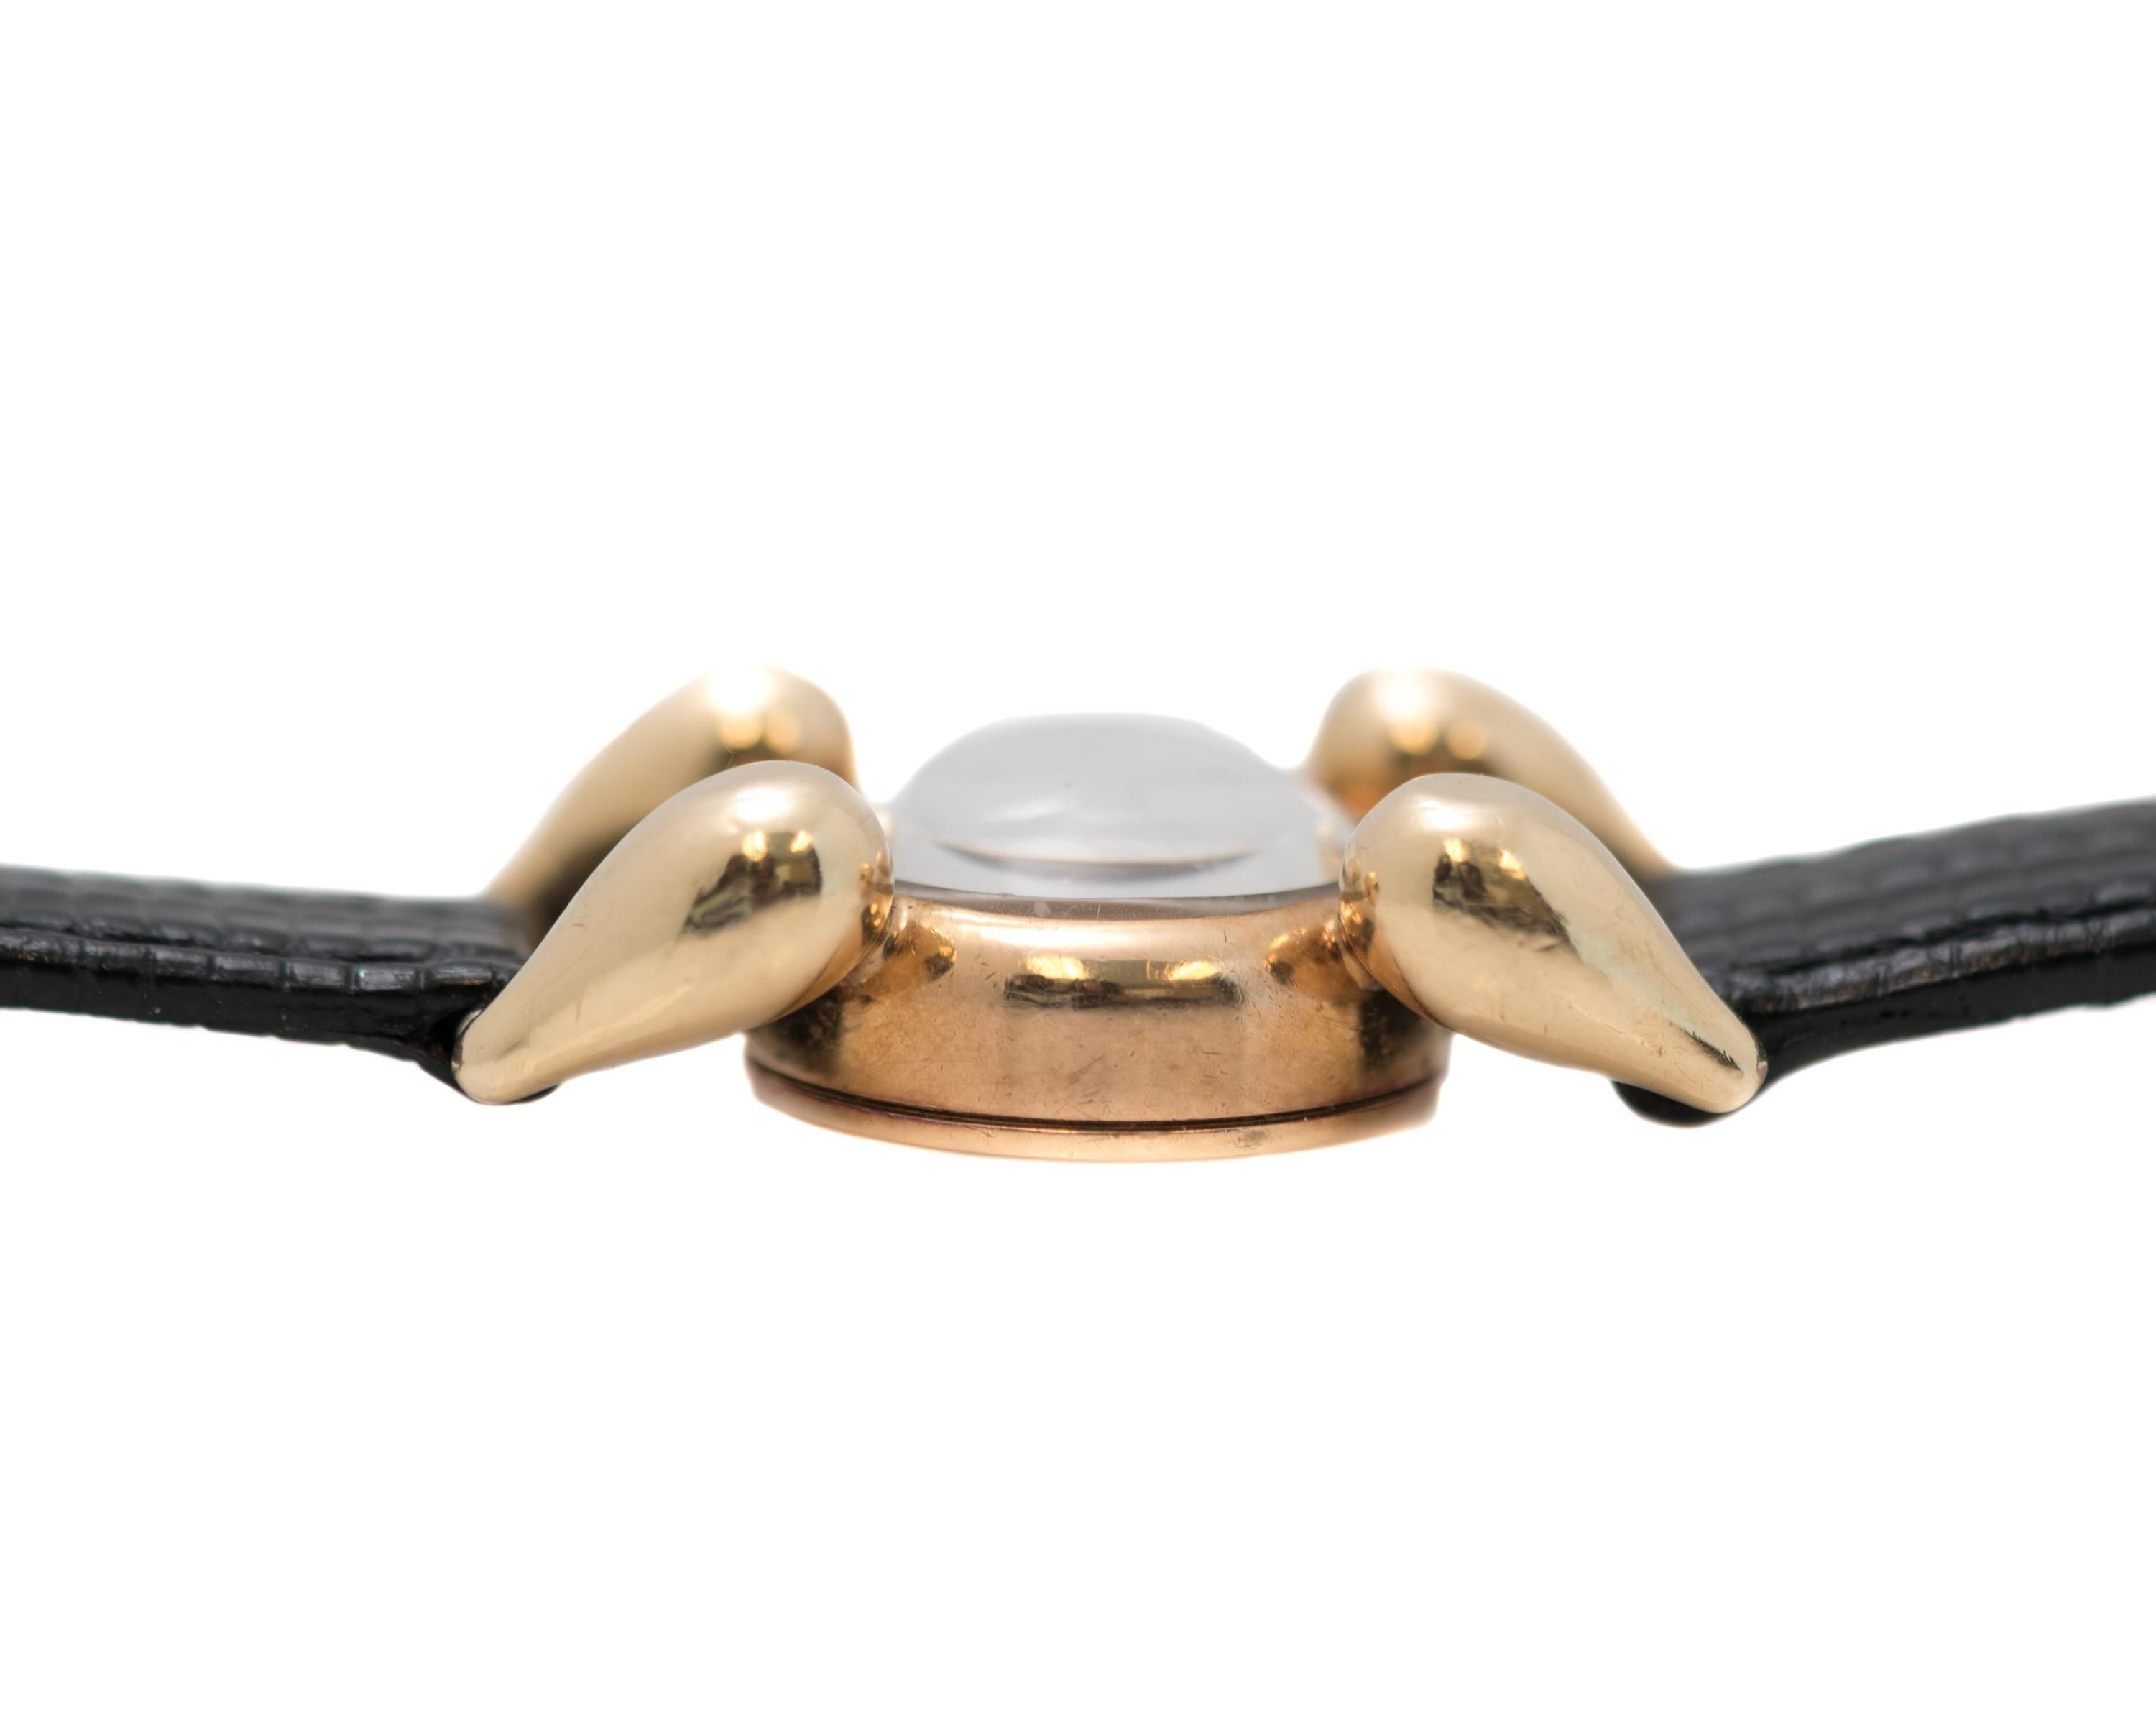 lucien piccard 18k gold watch